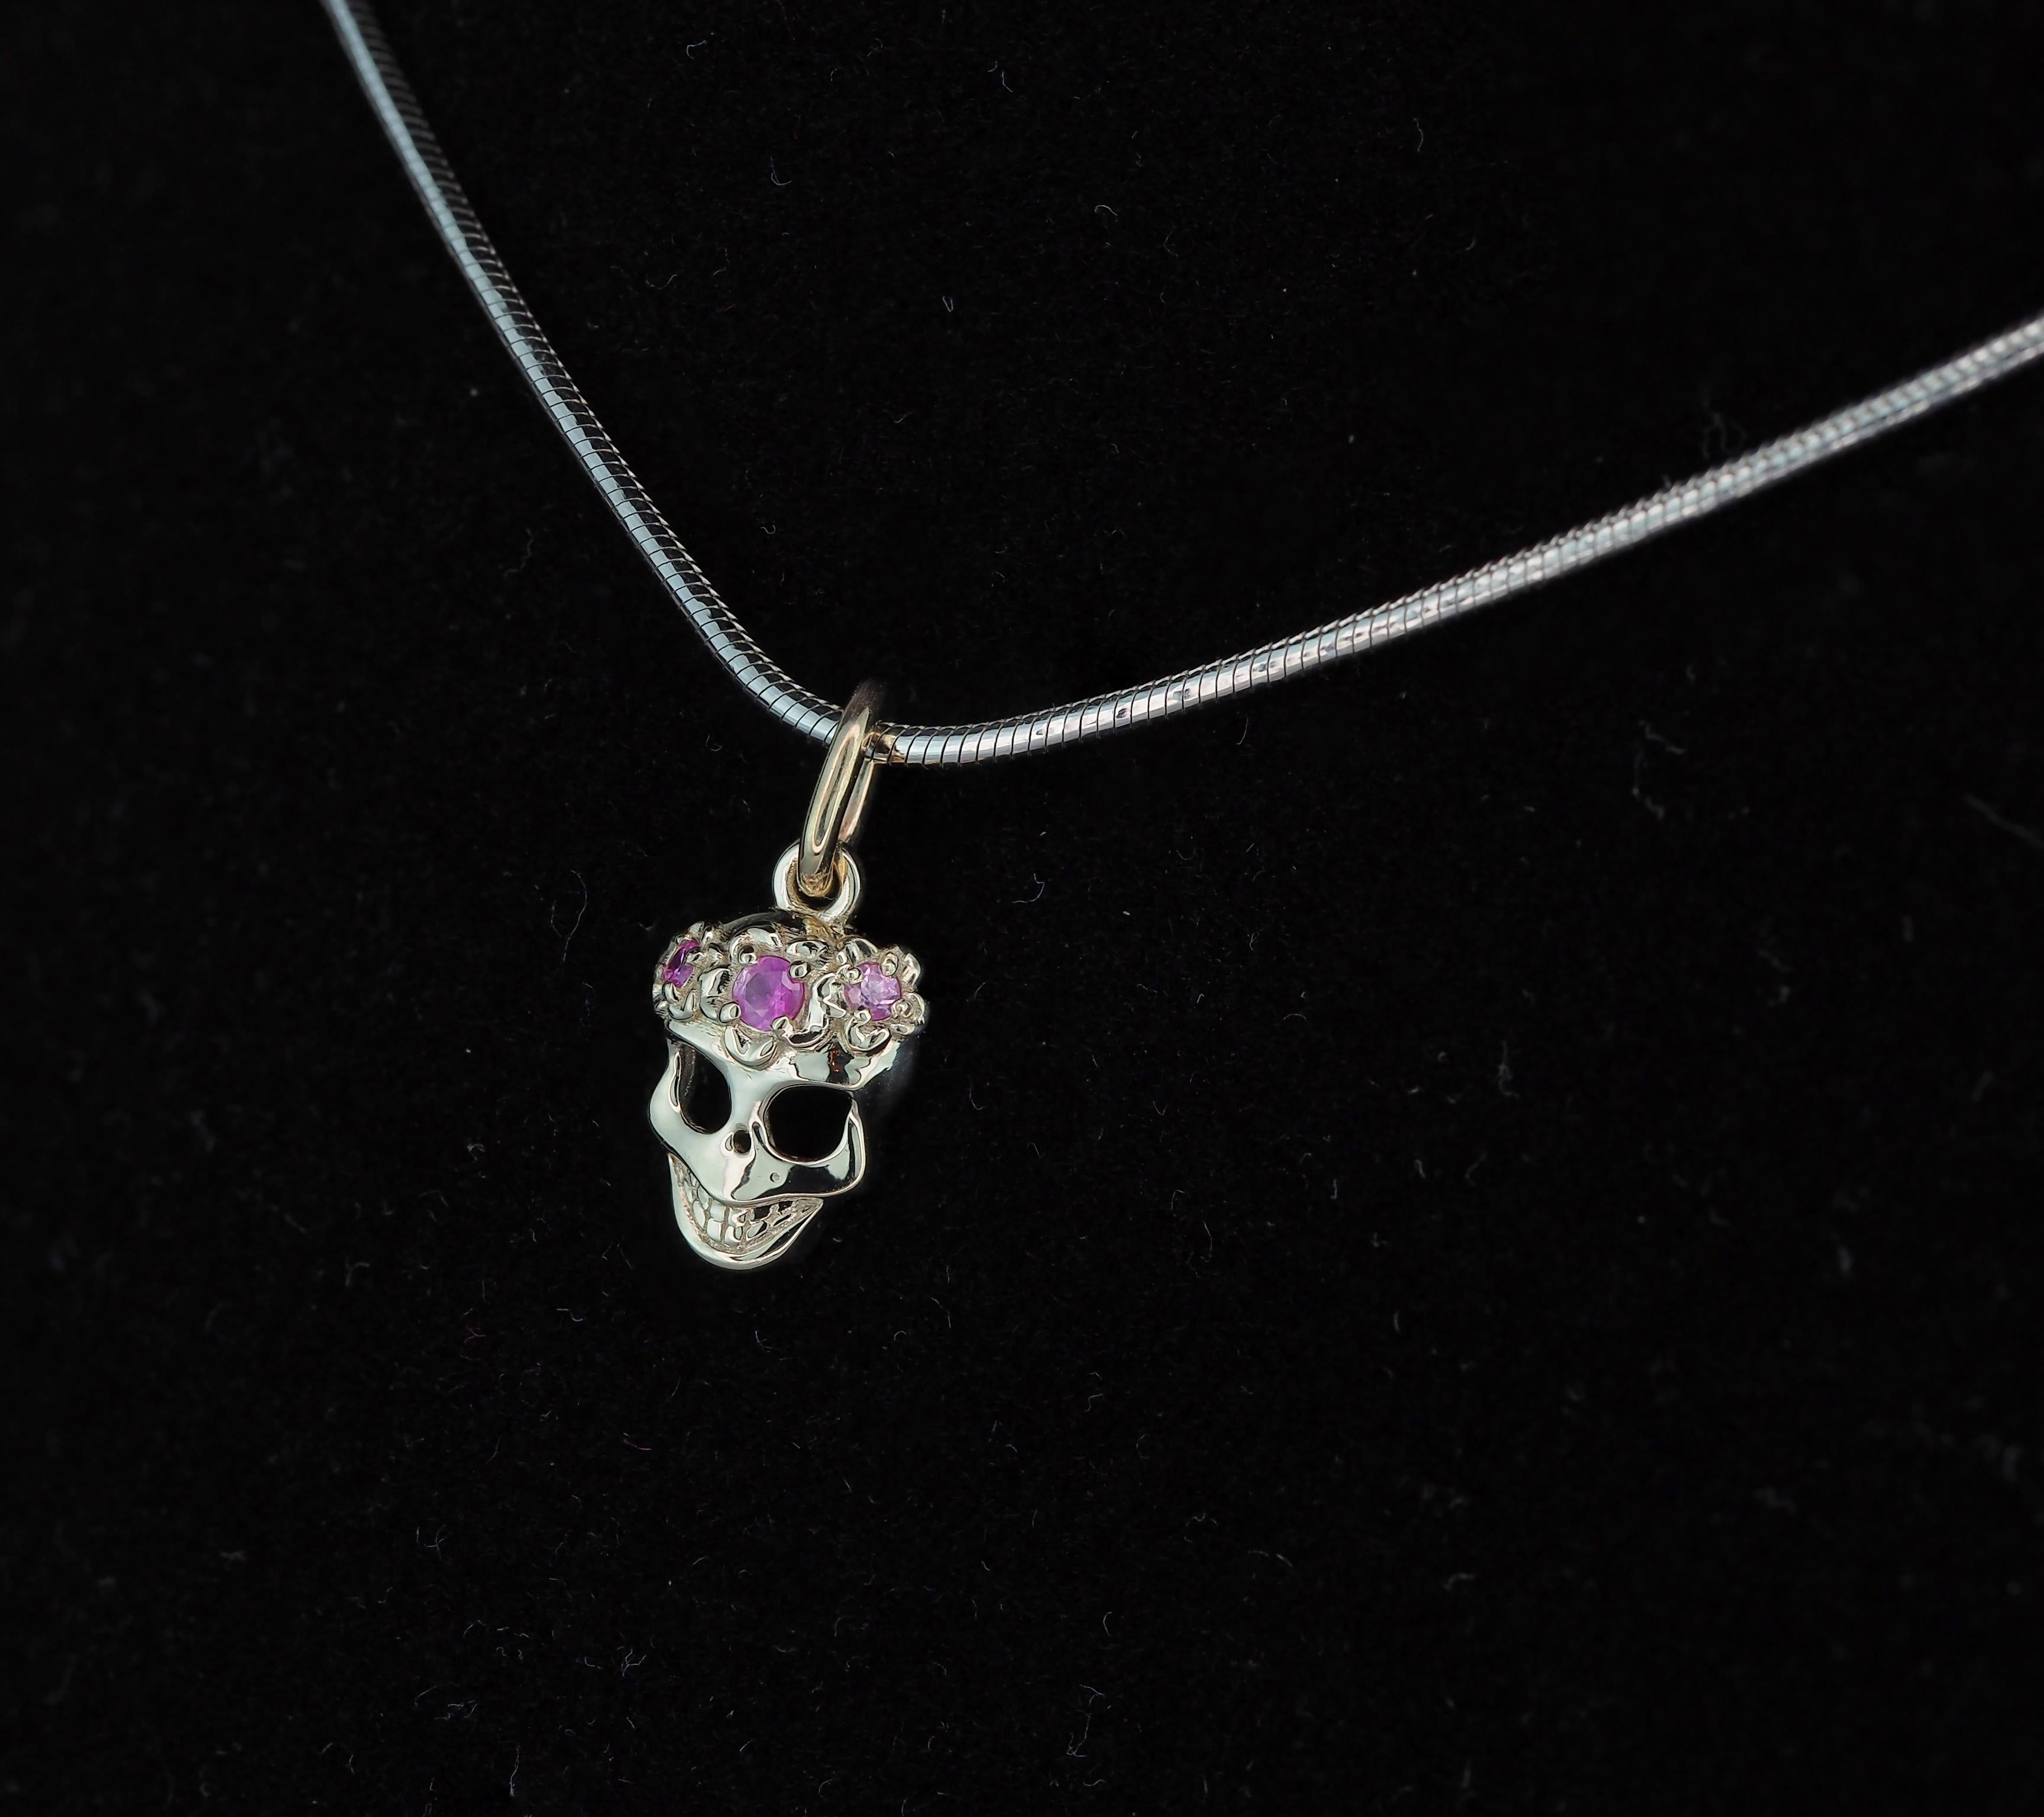 14k Gold Skull Pendant with Flowers with Sapphires For Sale 2